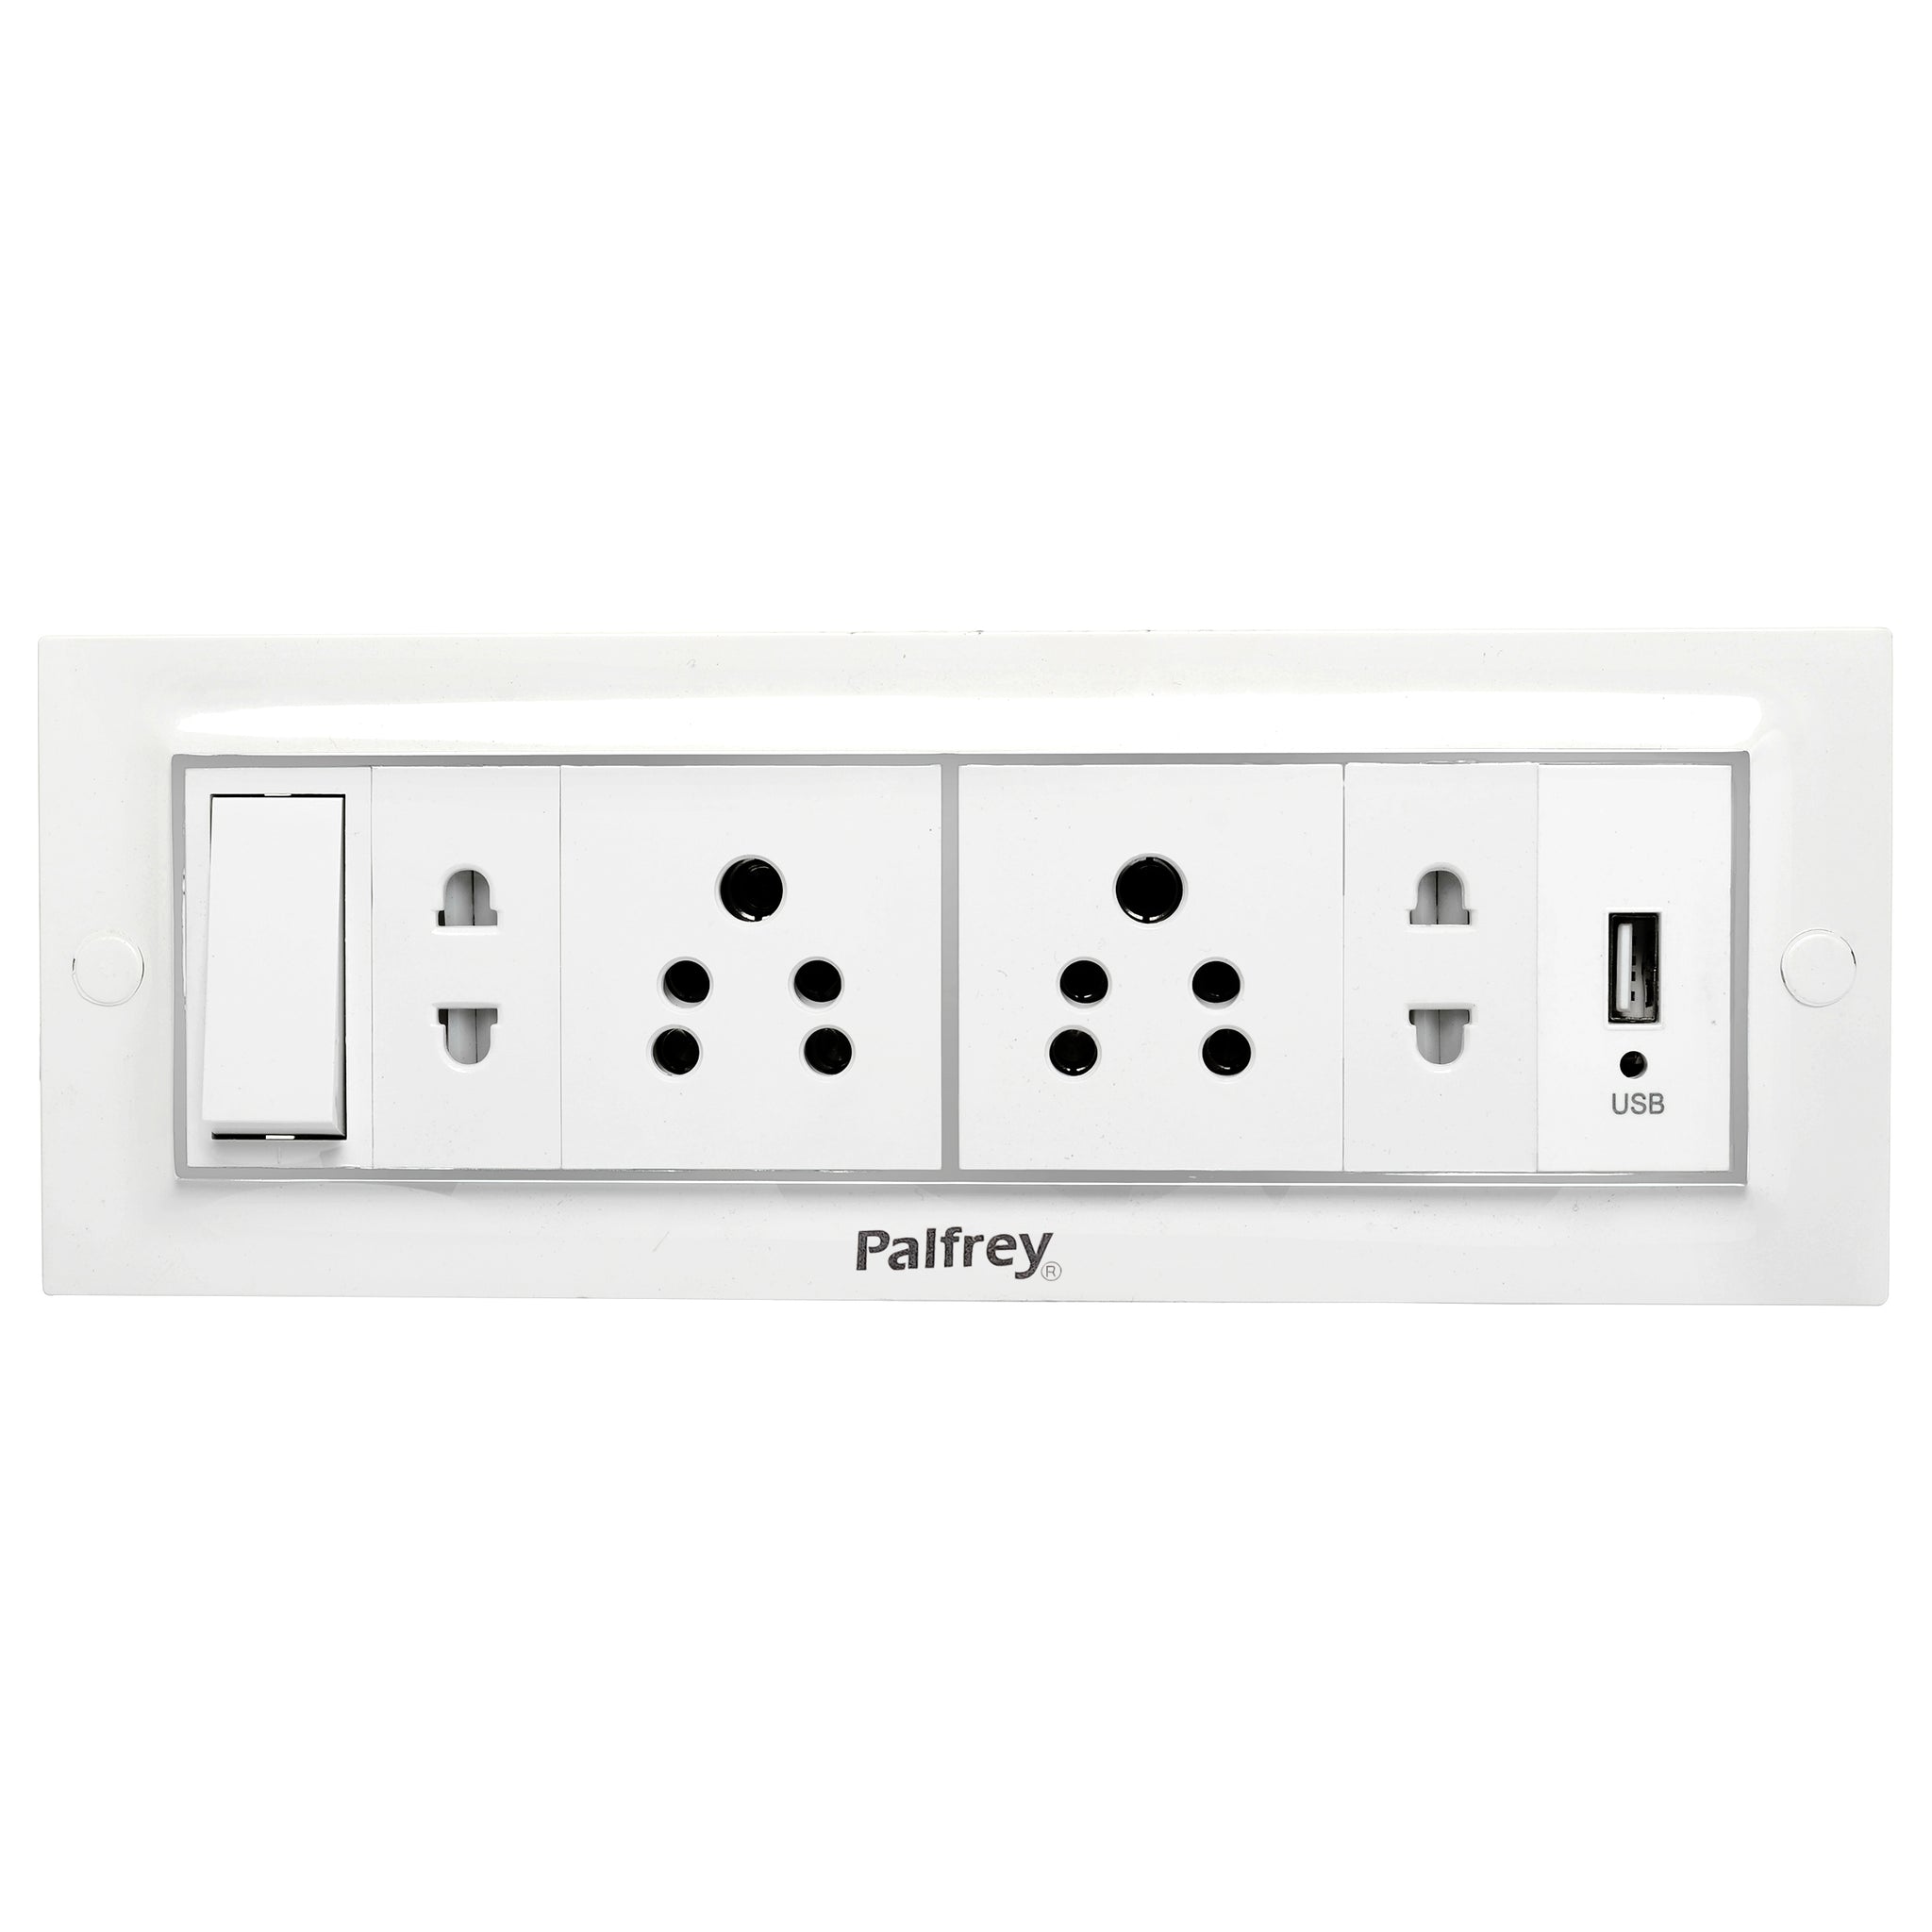 Palfrey Electric Extension Board - 5A + 5A + 2 Universal Two Pin Socket + USB Socket with Master Switch and Heavy Duty Wire (White)